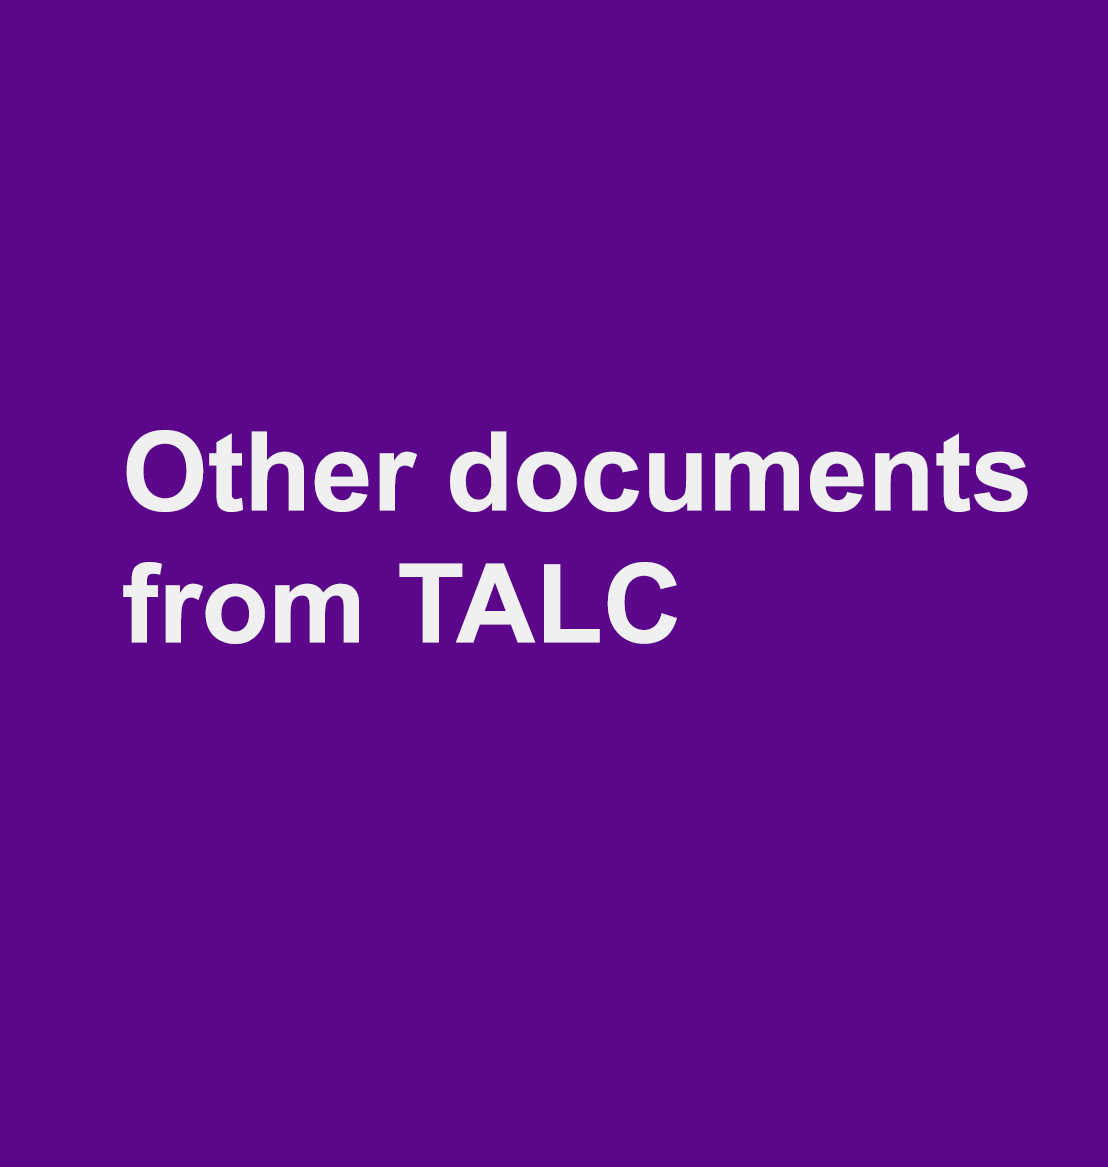 Other documents from TALC